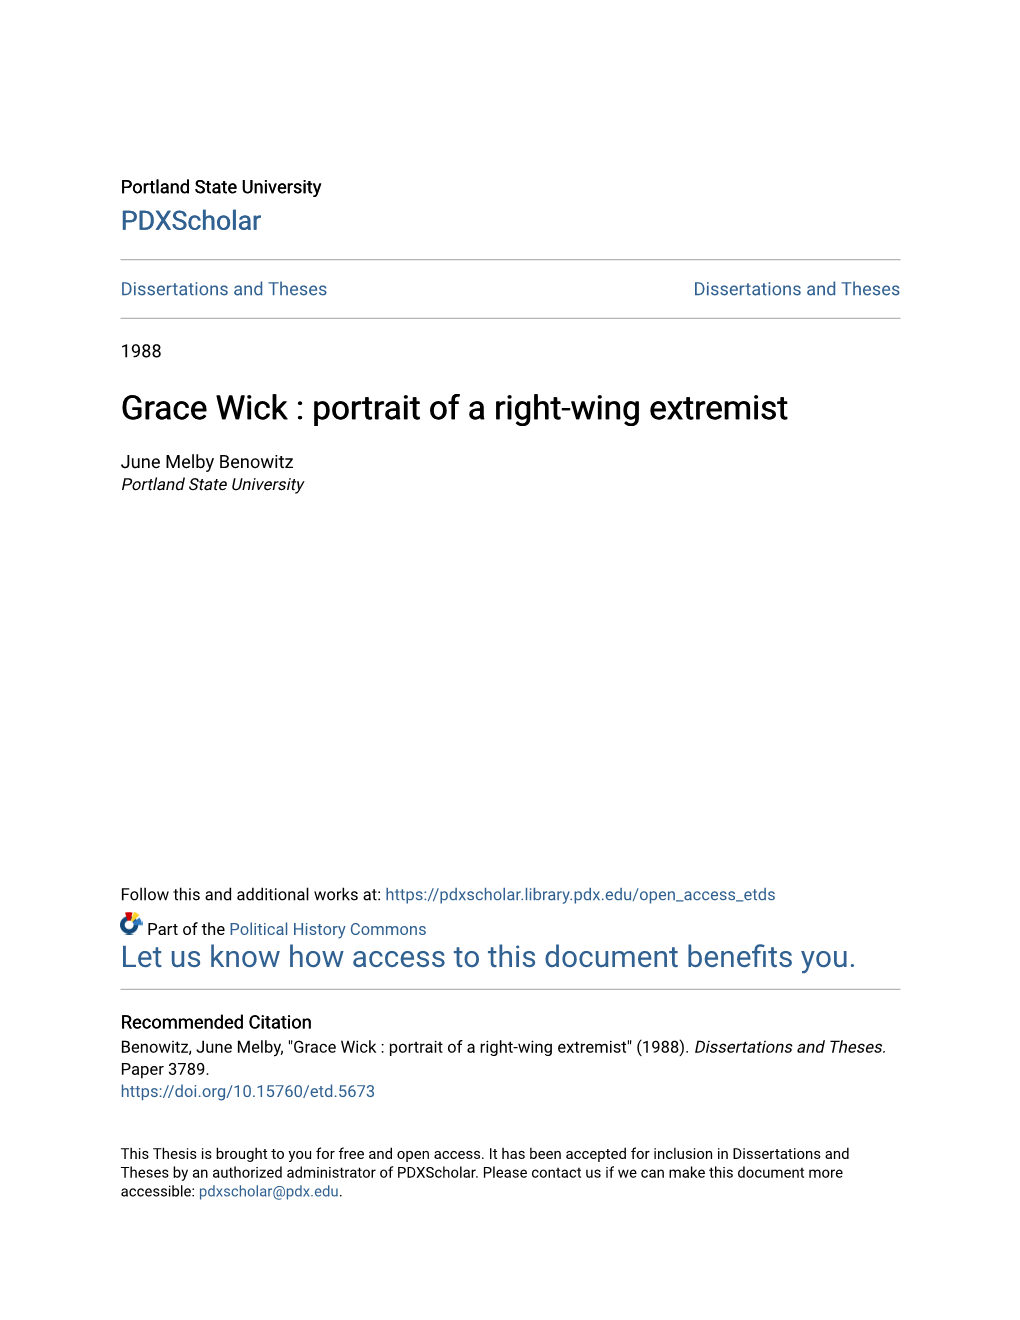 Grace Wick : Portrait of a Right-Wing Extremist